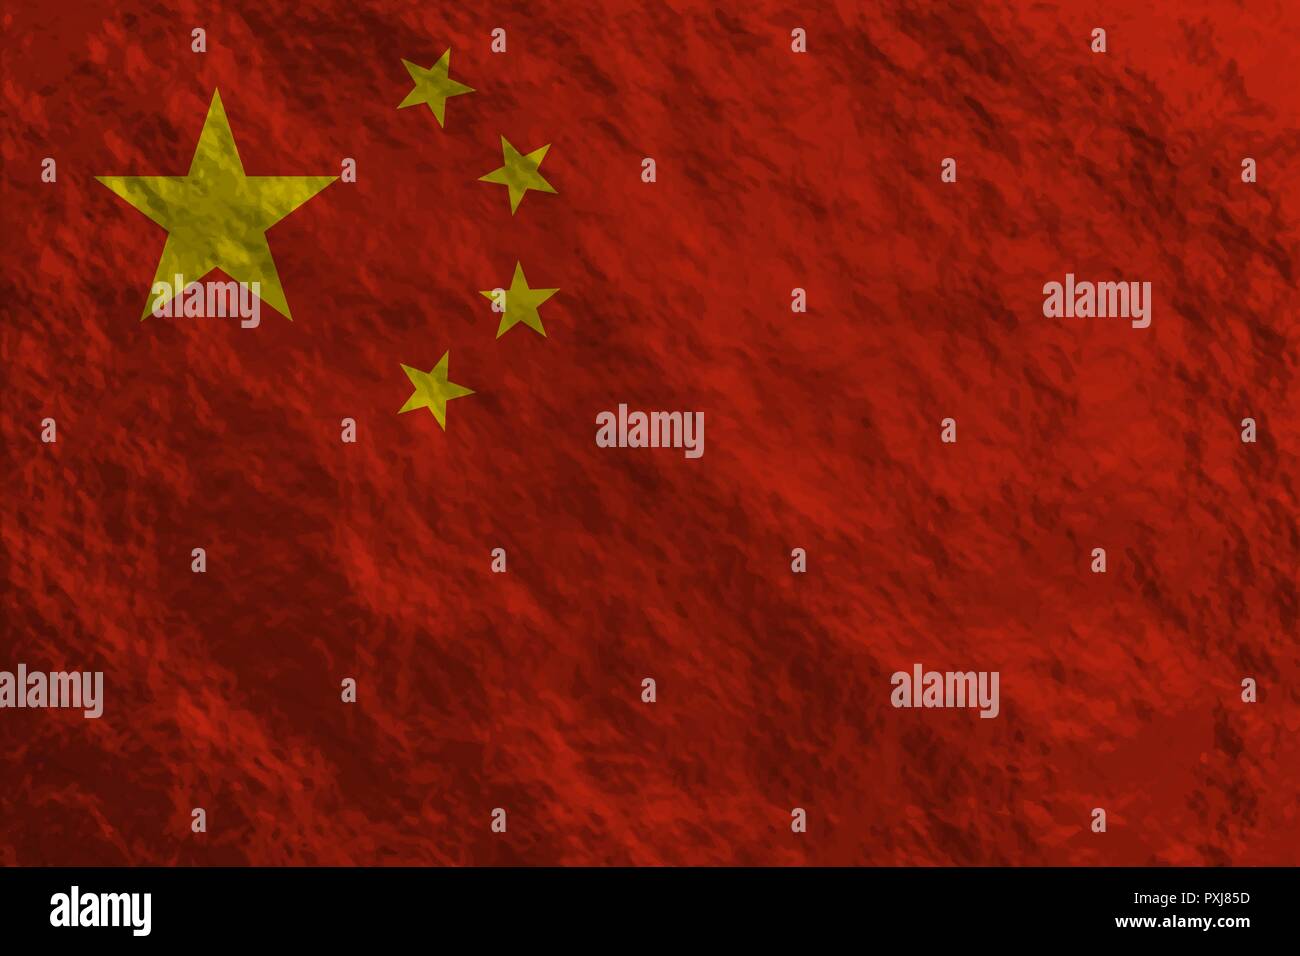 Grunge styled flag of China with distress texture. Stock Vector